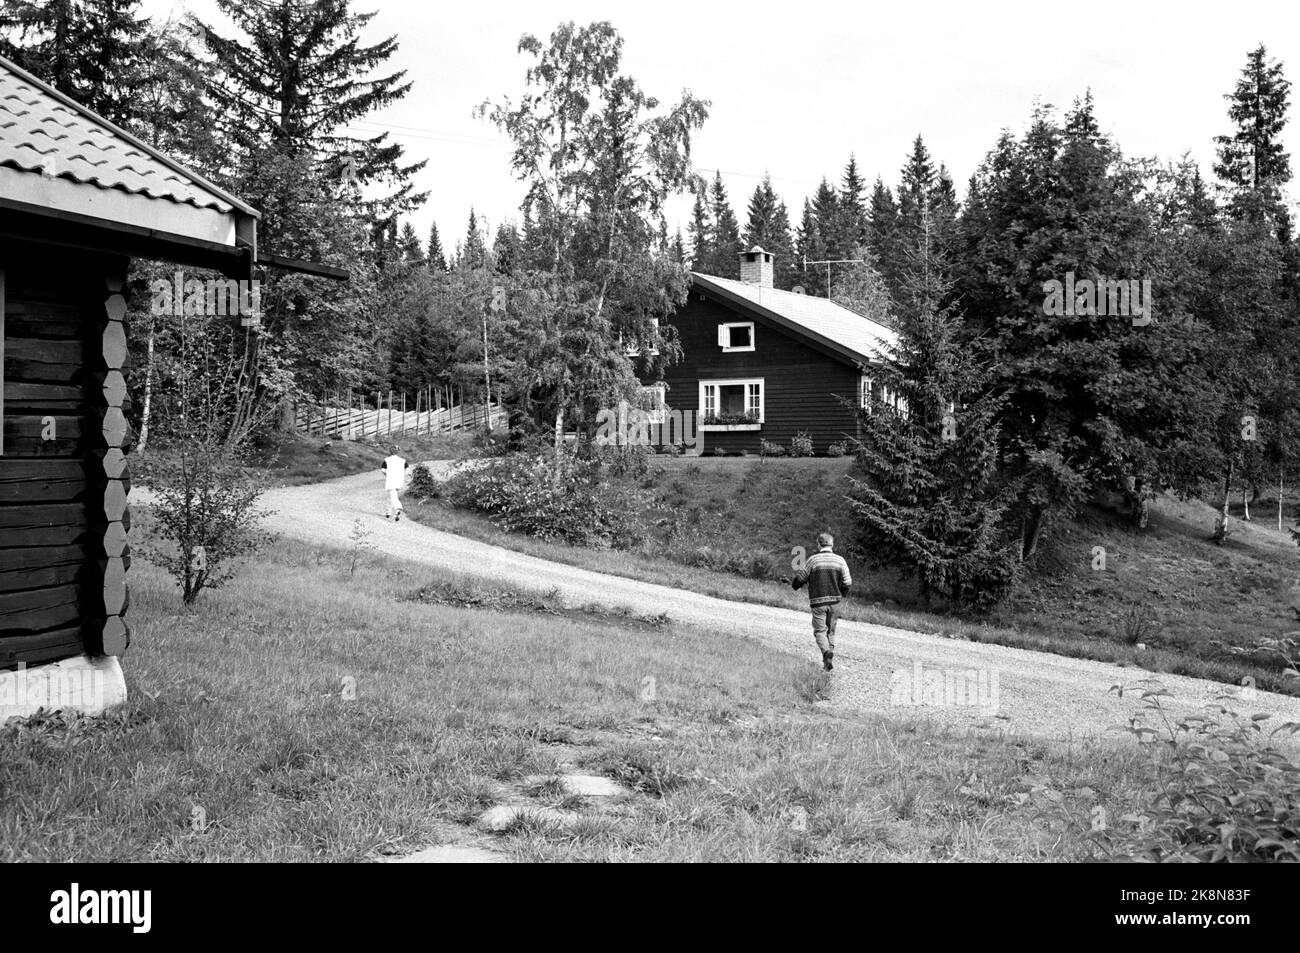 Hamar in the summer of 1970. West Germany's Chancellor Willy Brandt and Mrs. Rut Brandt bought a cabin in Vangsåsen in 1965 at Hamar, and here they spend their summer holidays with the family. Here the channel couple on their way back to the cabin after a walk in the area. Photo: Ivar Aaserud / Current / NTB Stock Photo